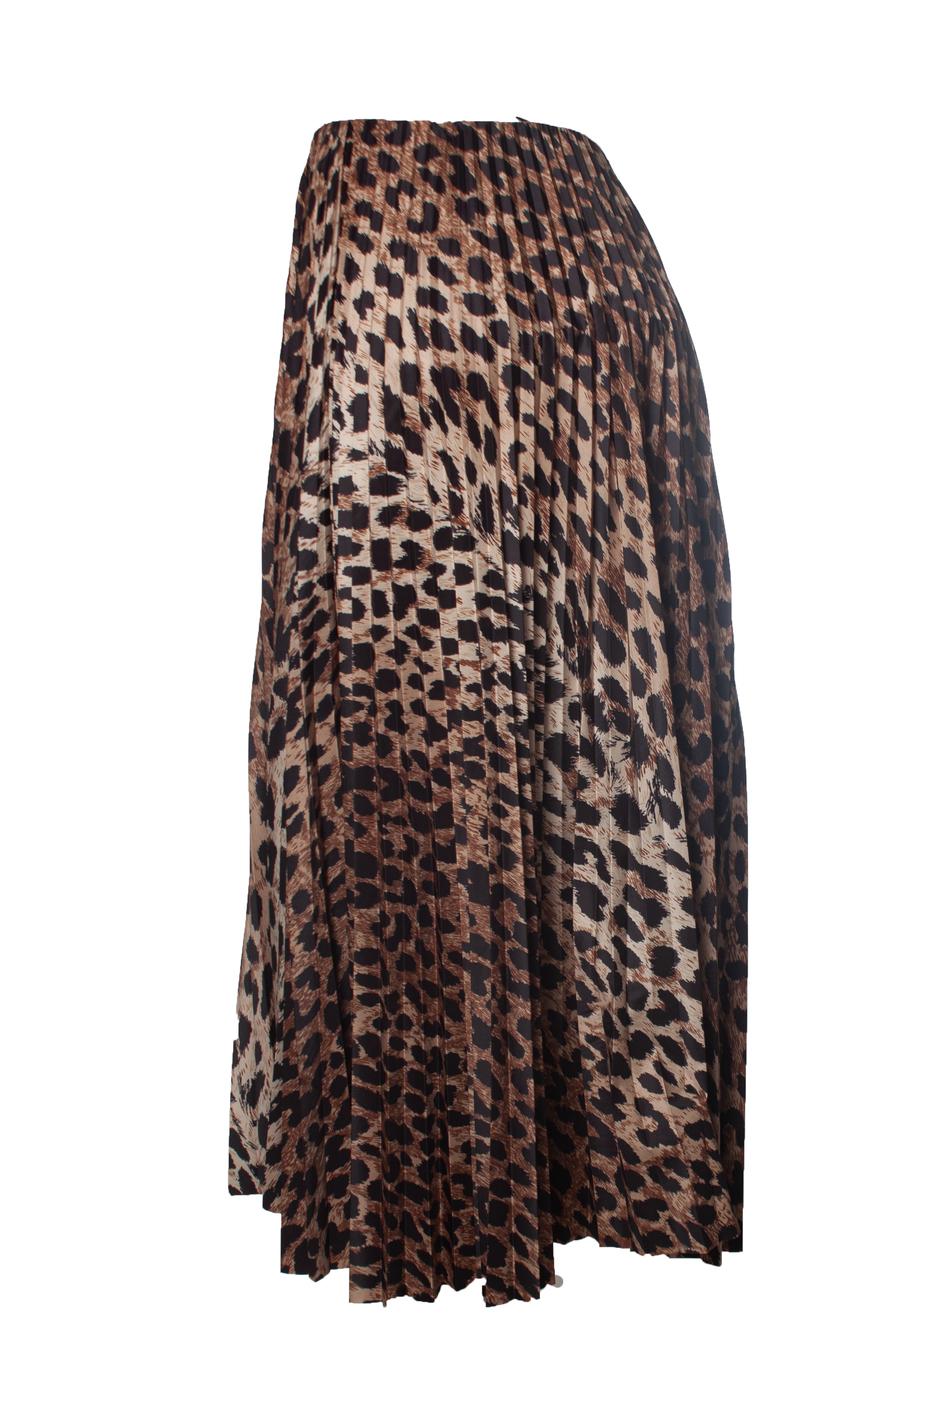 Balenciaga, High rise leopard print silk pleated midi skirt with corset. The item is in excellent condition.

• CONDITION: excellent condition

• SIZE: FR40 - M 

• MEASUREMENTS: length 71 cm, waist 38 cm

• MATERIAL: 100% polyester 

• CARE: dry